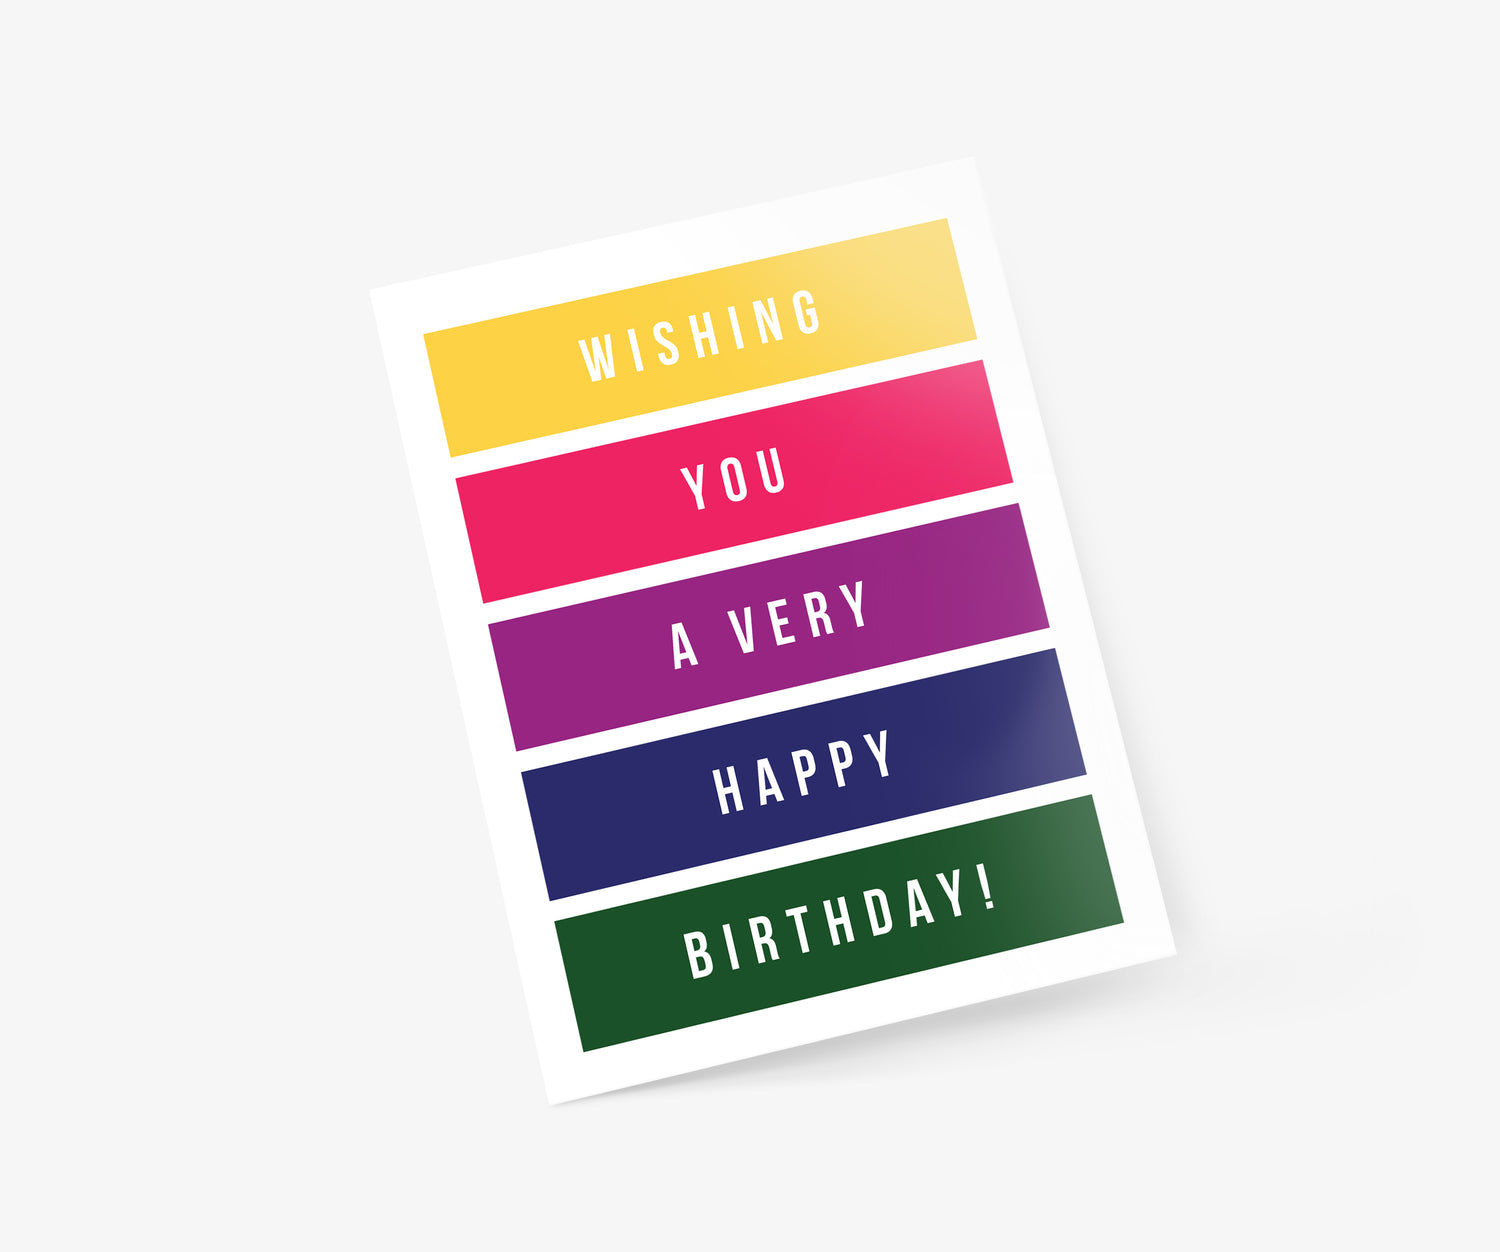 Wishing You A Very Happy Birthday Birthday Card | Footnotes Paper